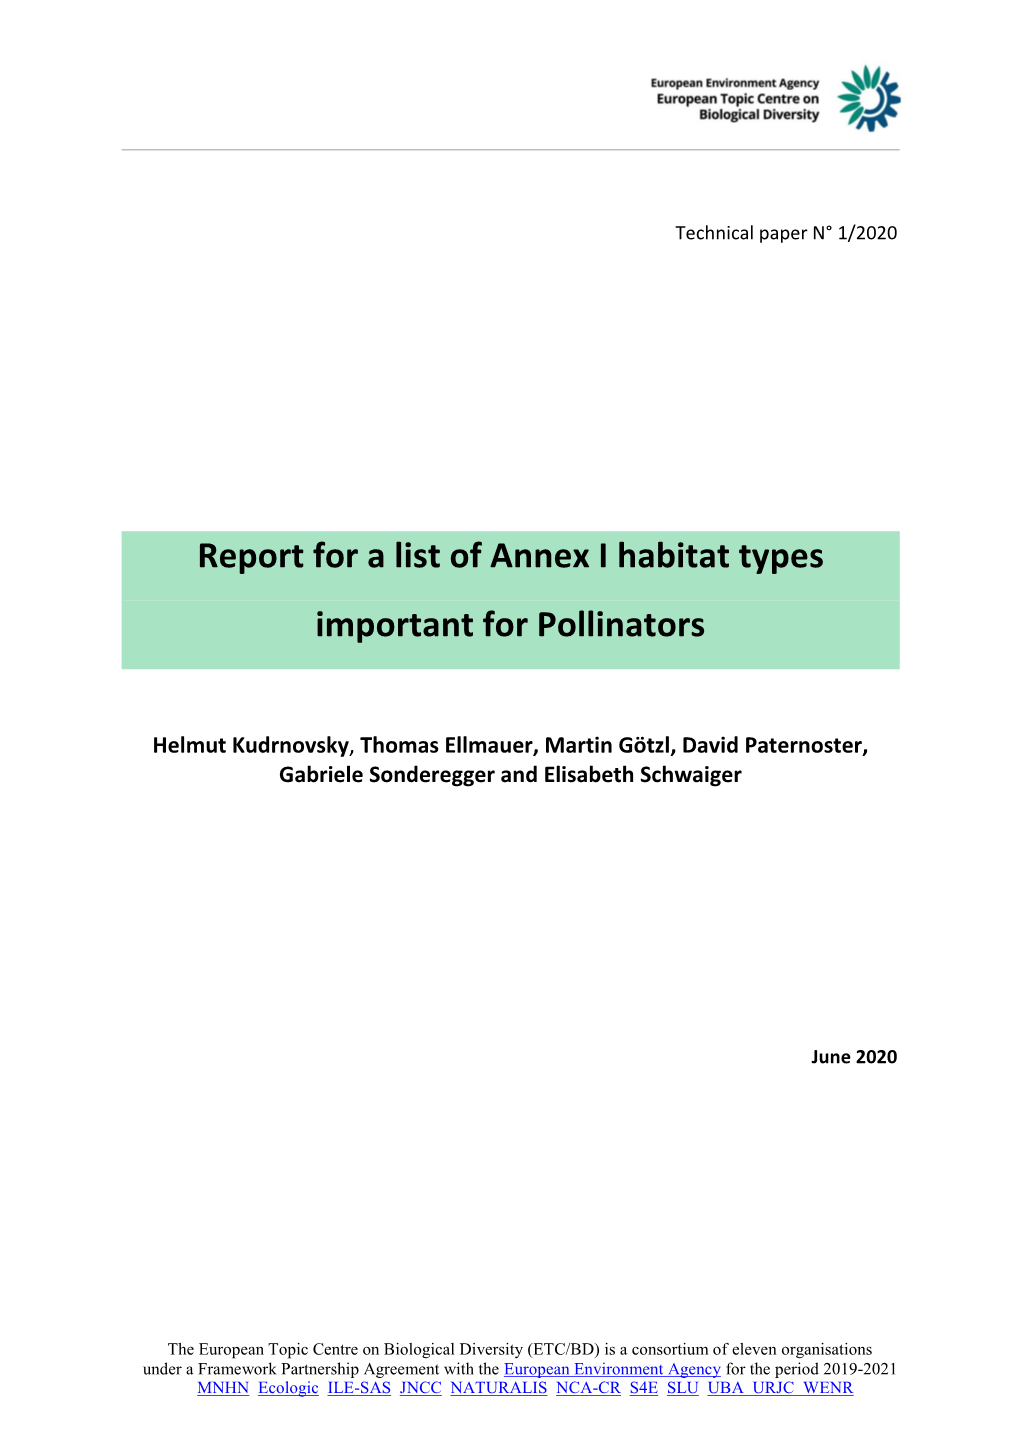 Report for a List of Annex I Habitat Types Important for Pollinators